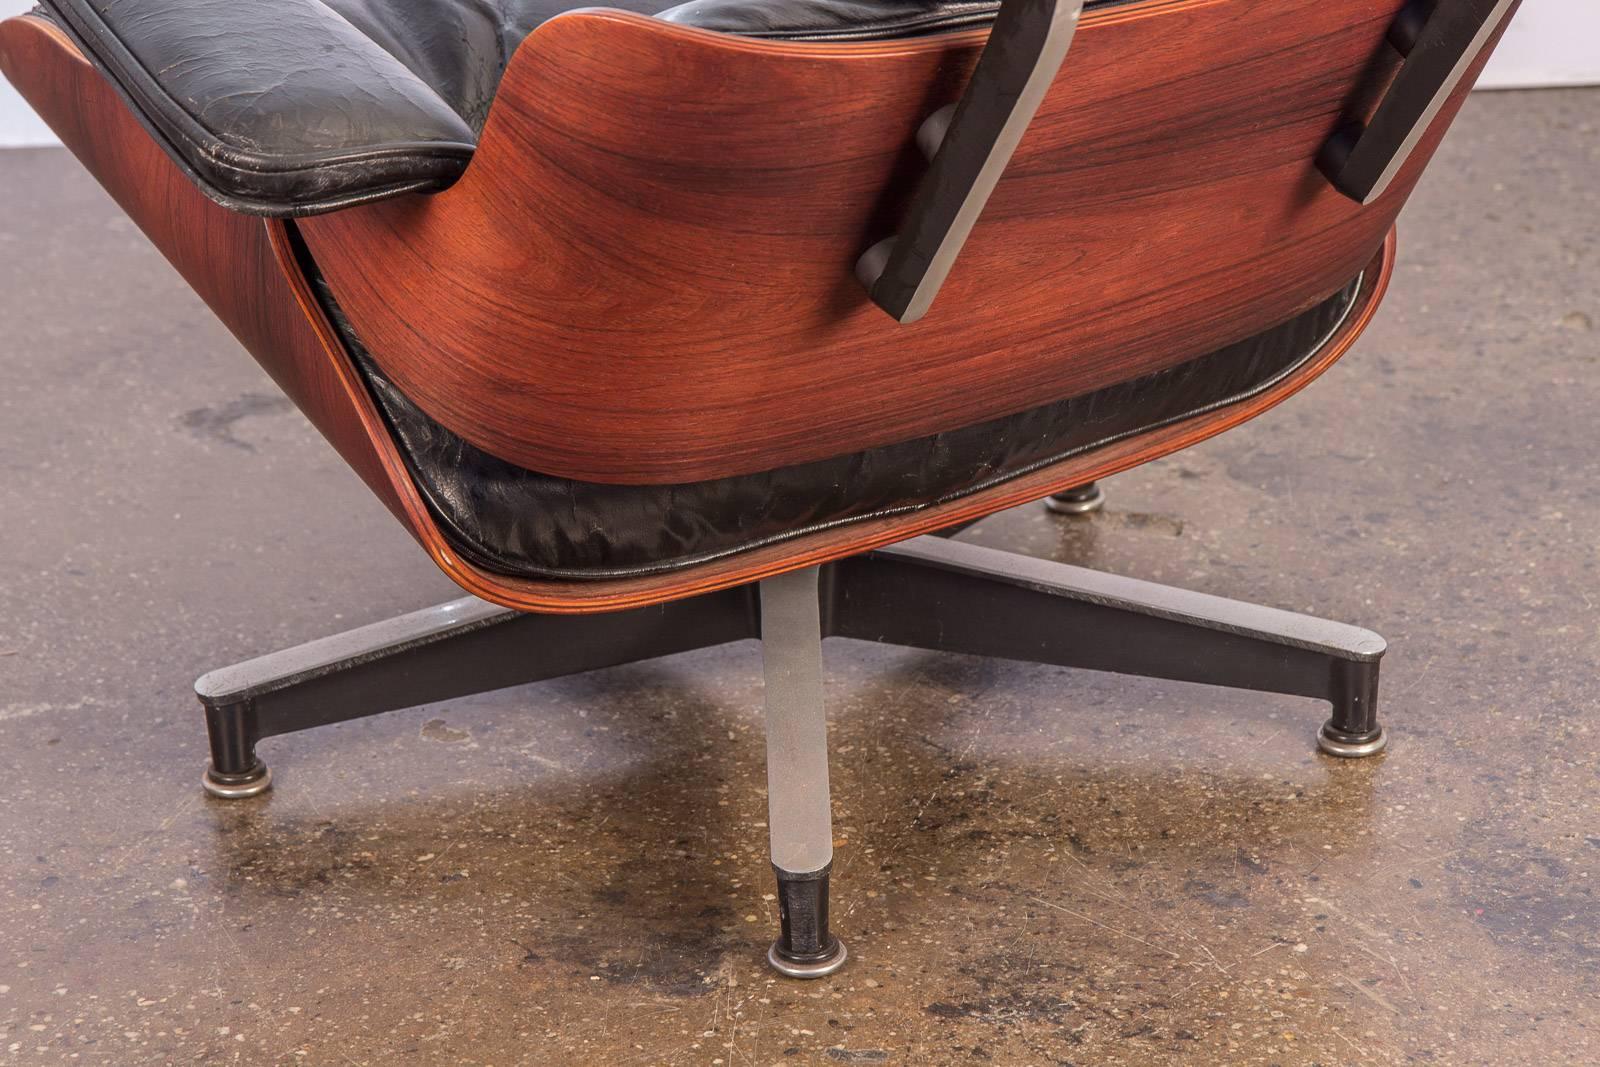 Molded Charles and Ray Eames 670 Lounge Chair for Herman Miller